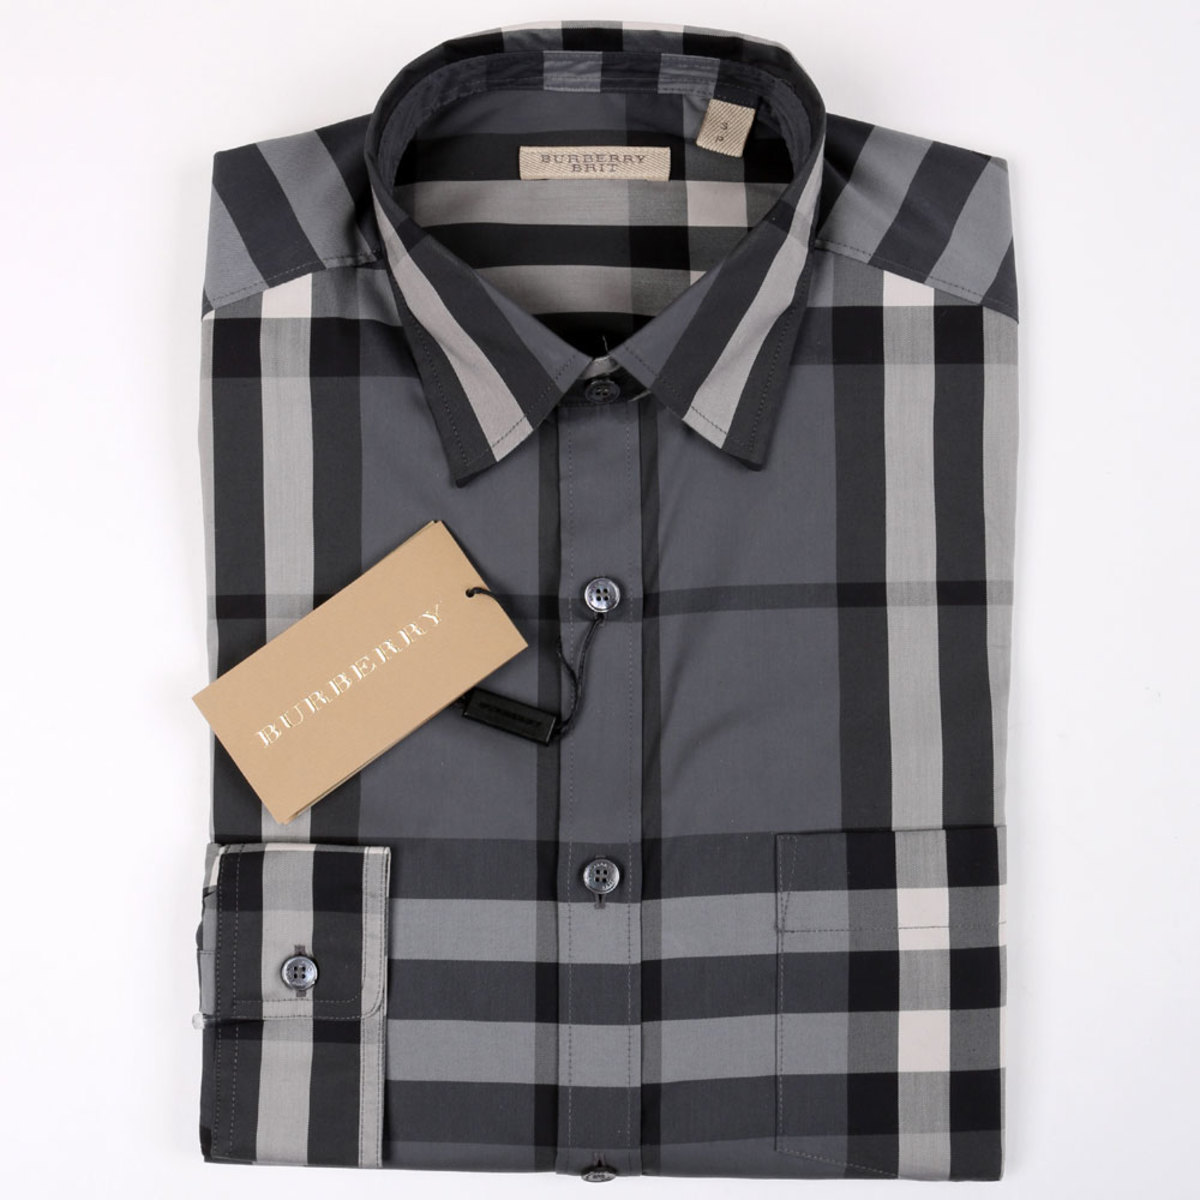 burberry shirts for cheap